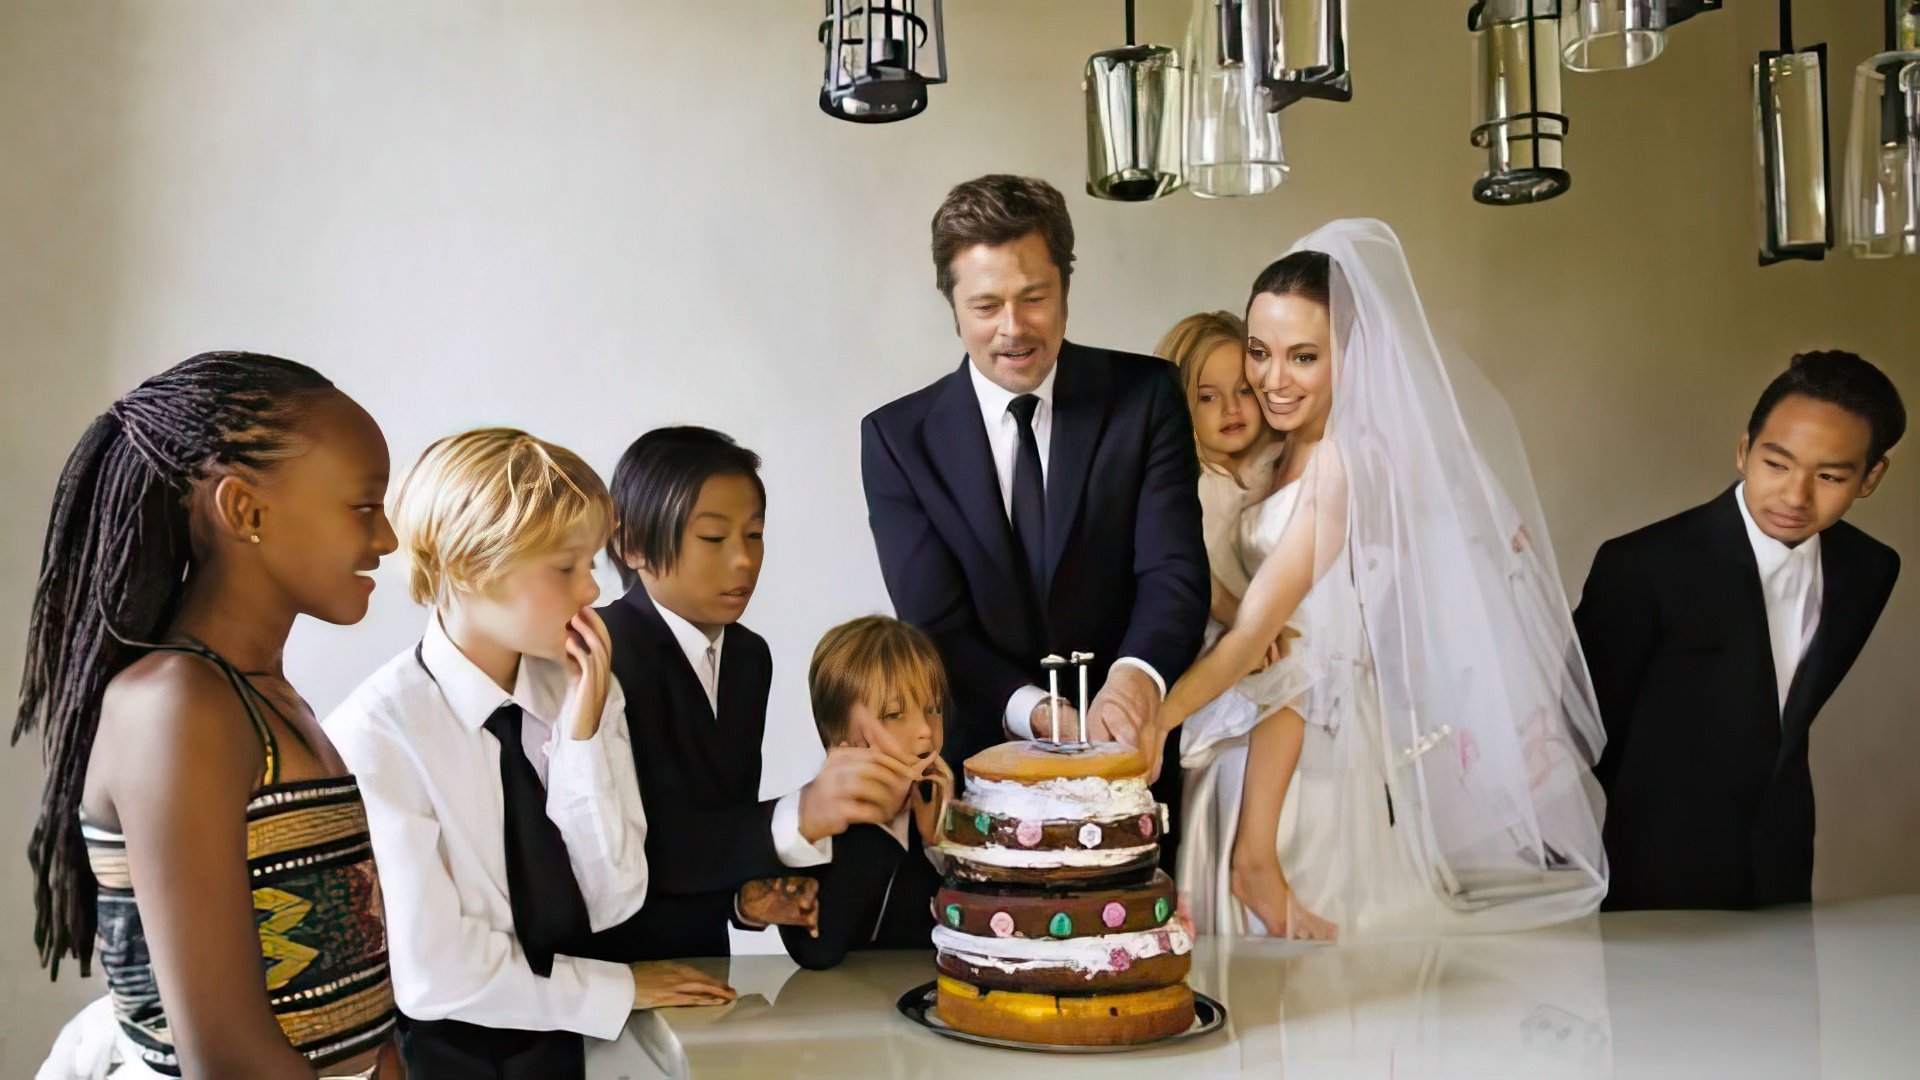 The wedding of Angelina Jolie and Brad Pitt took place in August 2014